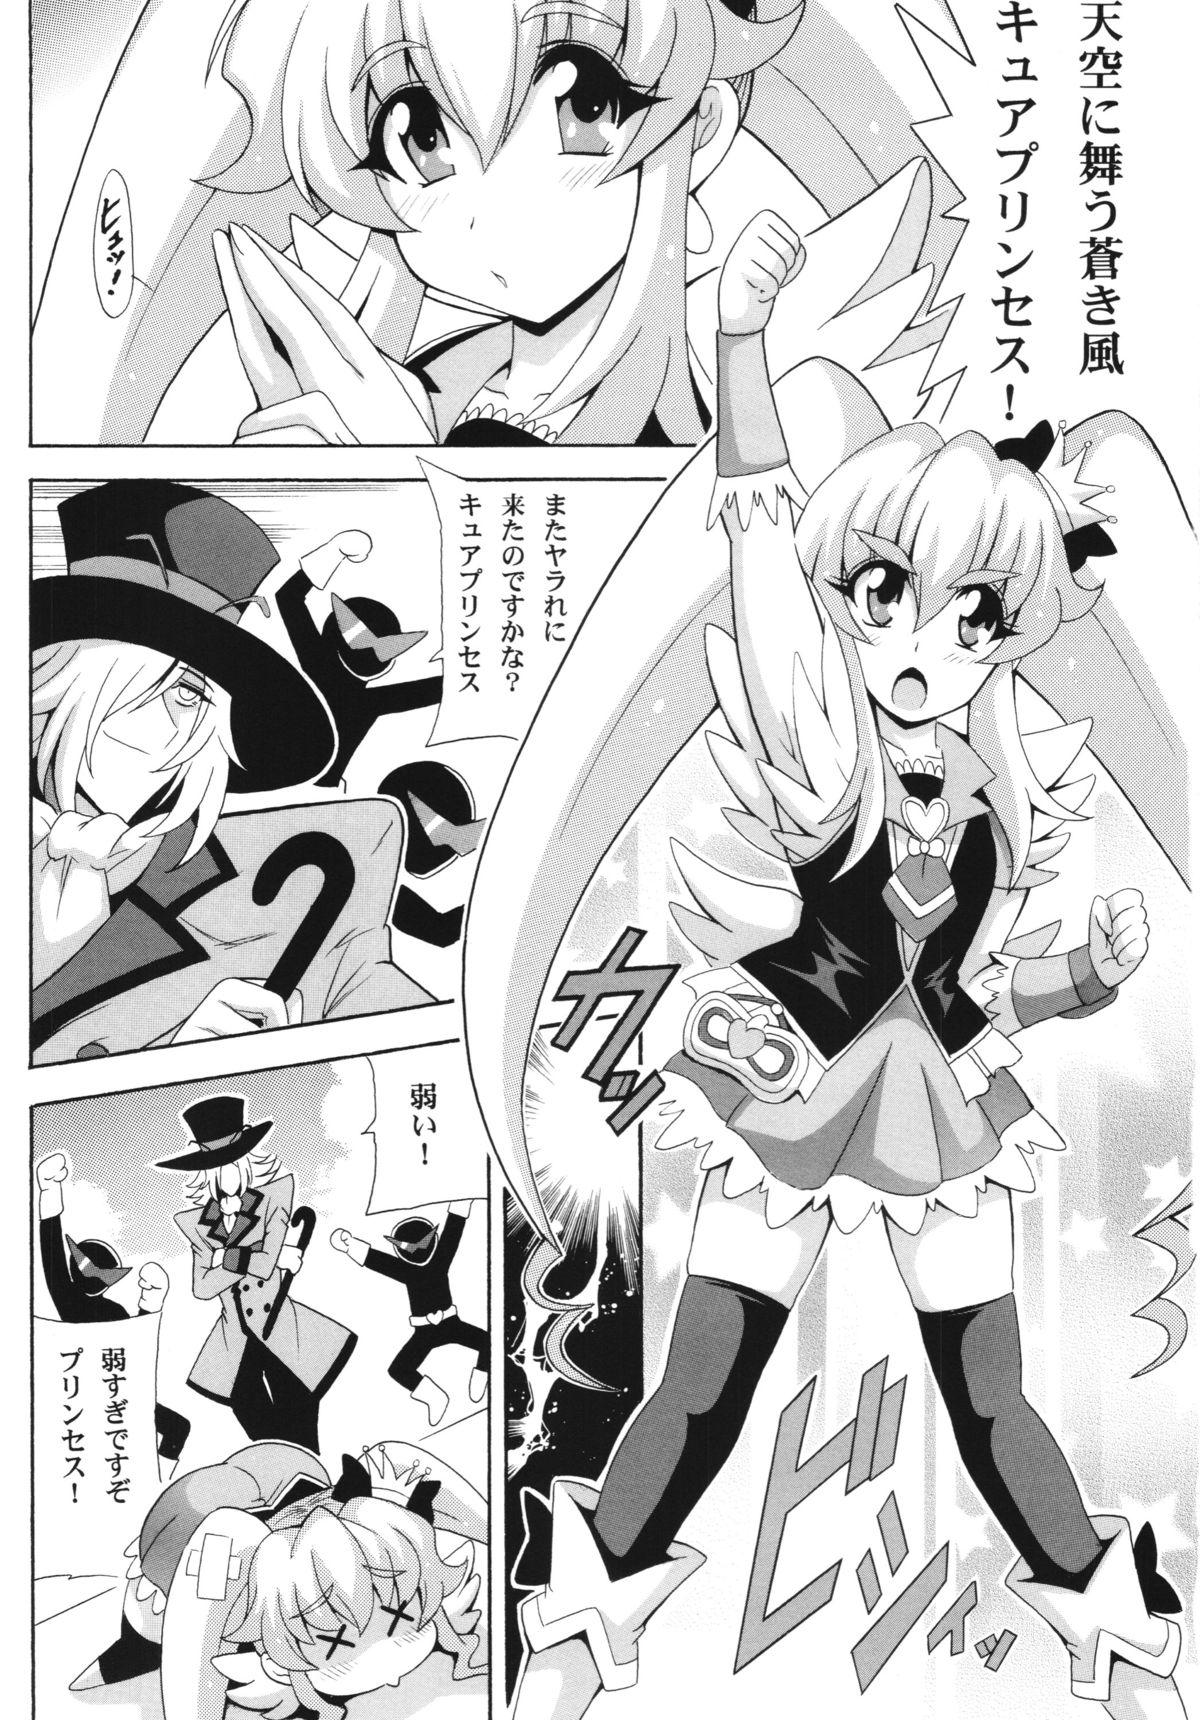 Hermana THE☆WEAKEST-PRINCESS - Happinesscharge precure Ink - Page 3